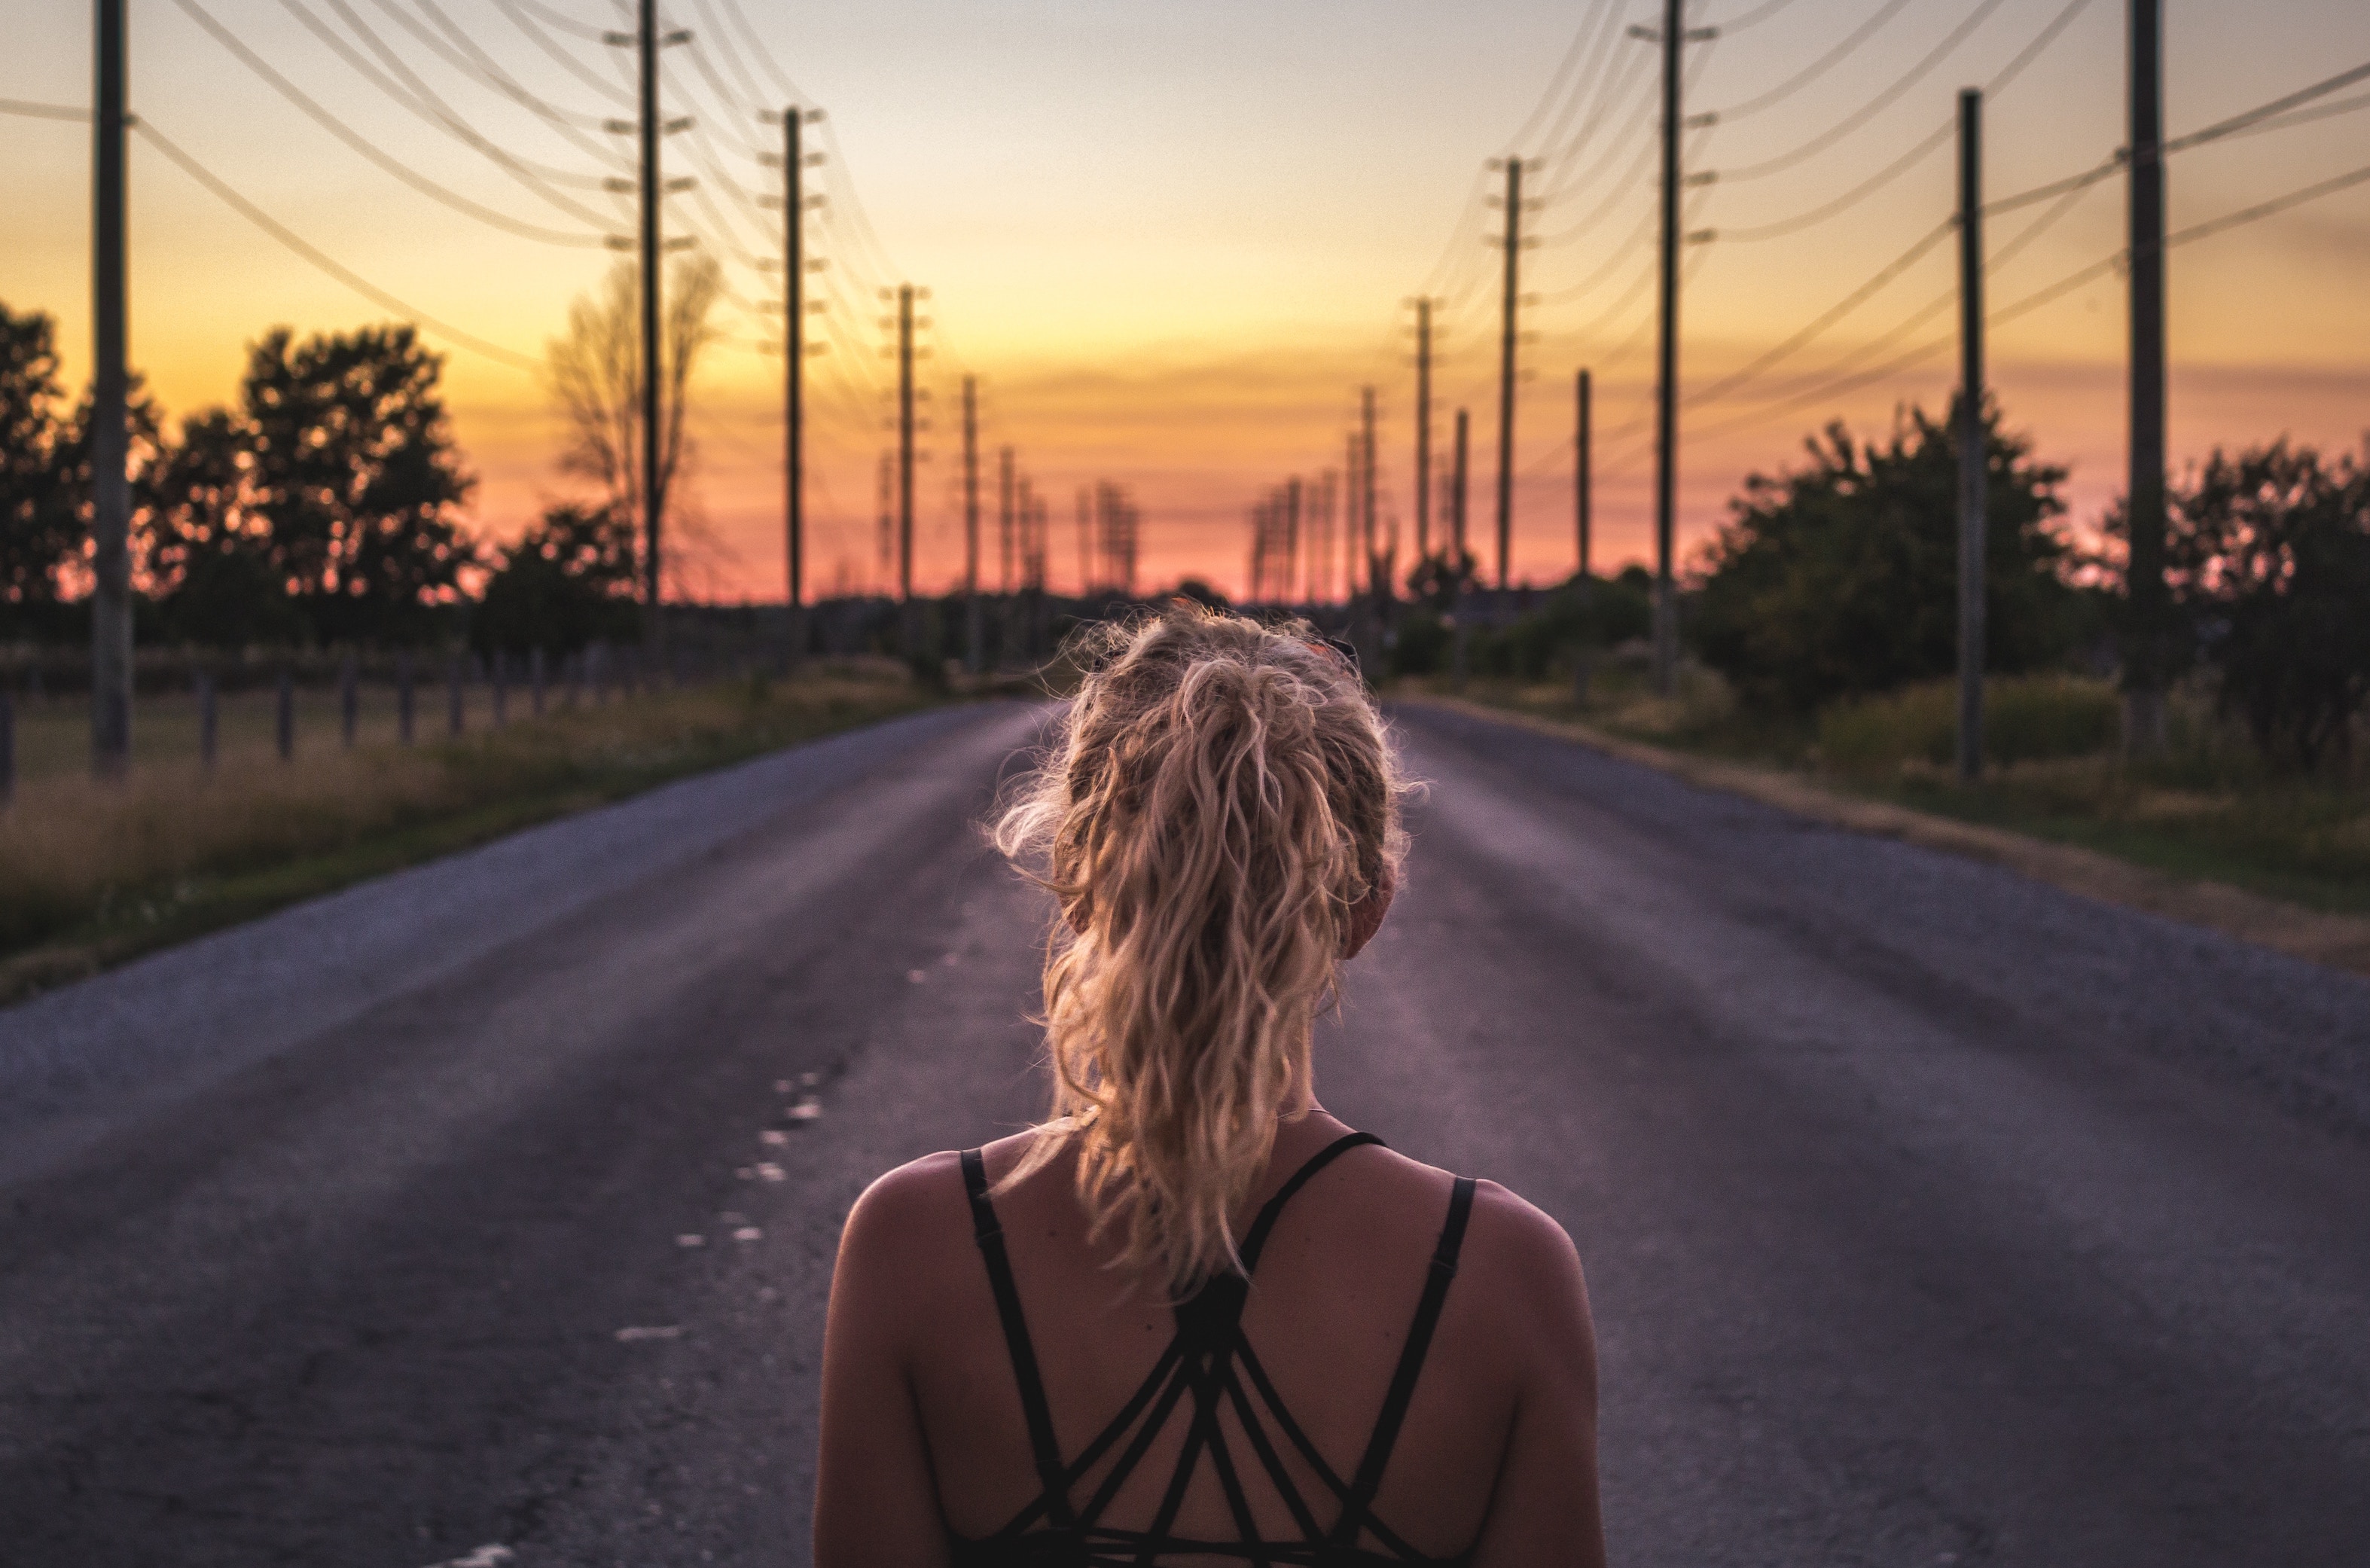 You're likely to encounter a few roadblocks along the way. Photo by Seth Macey on Unsplash